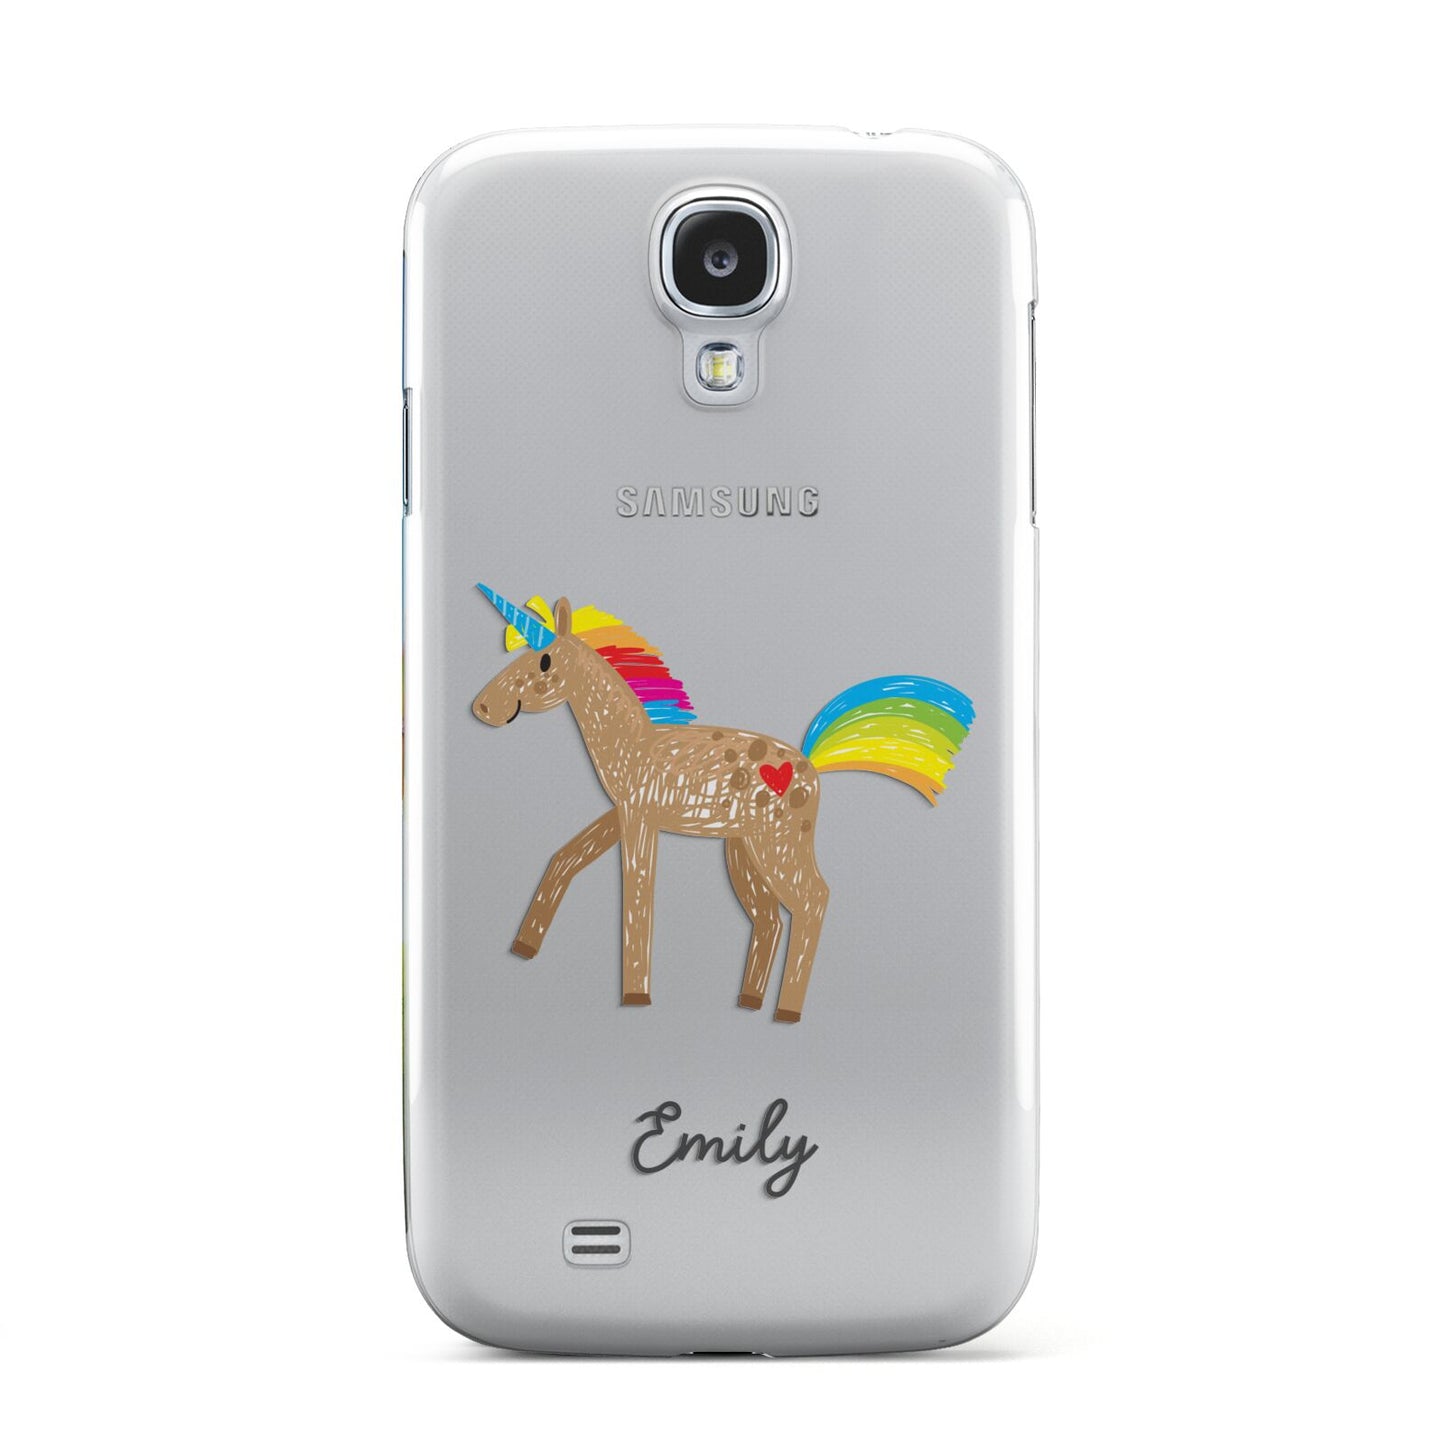 Personalised Unicorn with Name Samsung Galaxy S4 Case